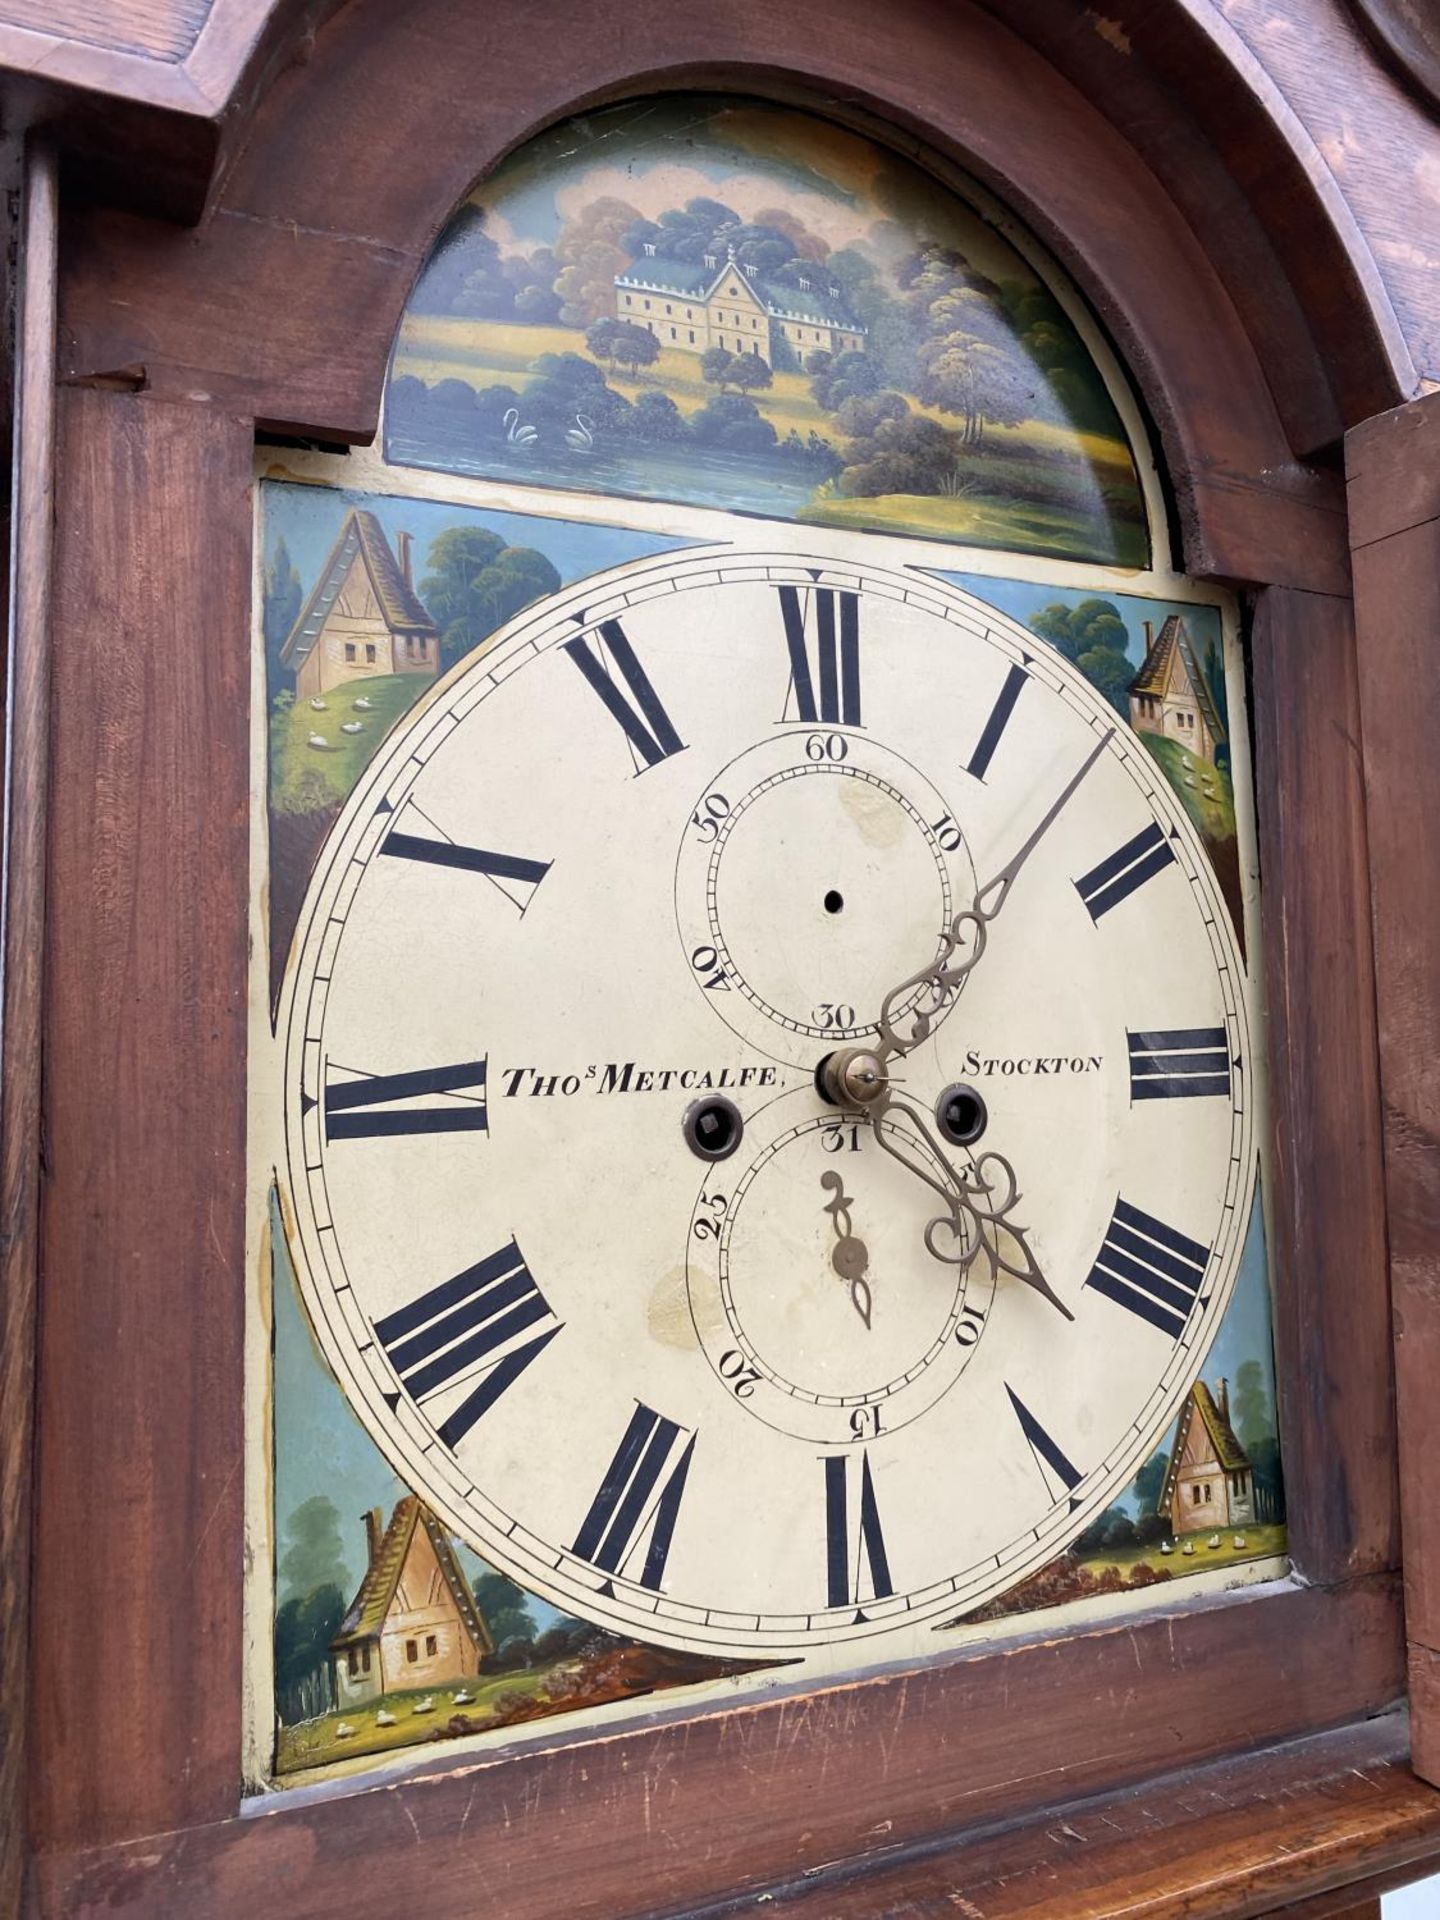 A VICTORIAN MAHGOANY EIGHT-DAY LONGCASE CLOCK WITH PAINTED ENAMEL DIAL, BY THOS. METCALFE, STOCKTON - Image 6 of 6